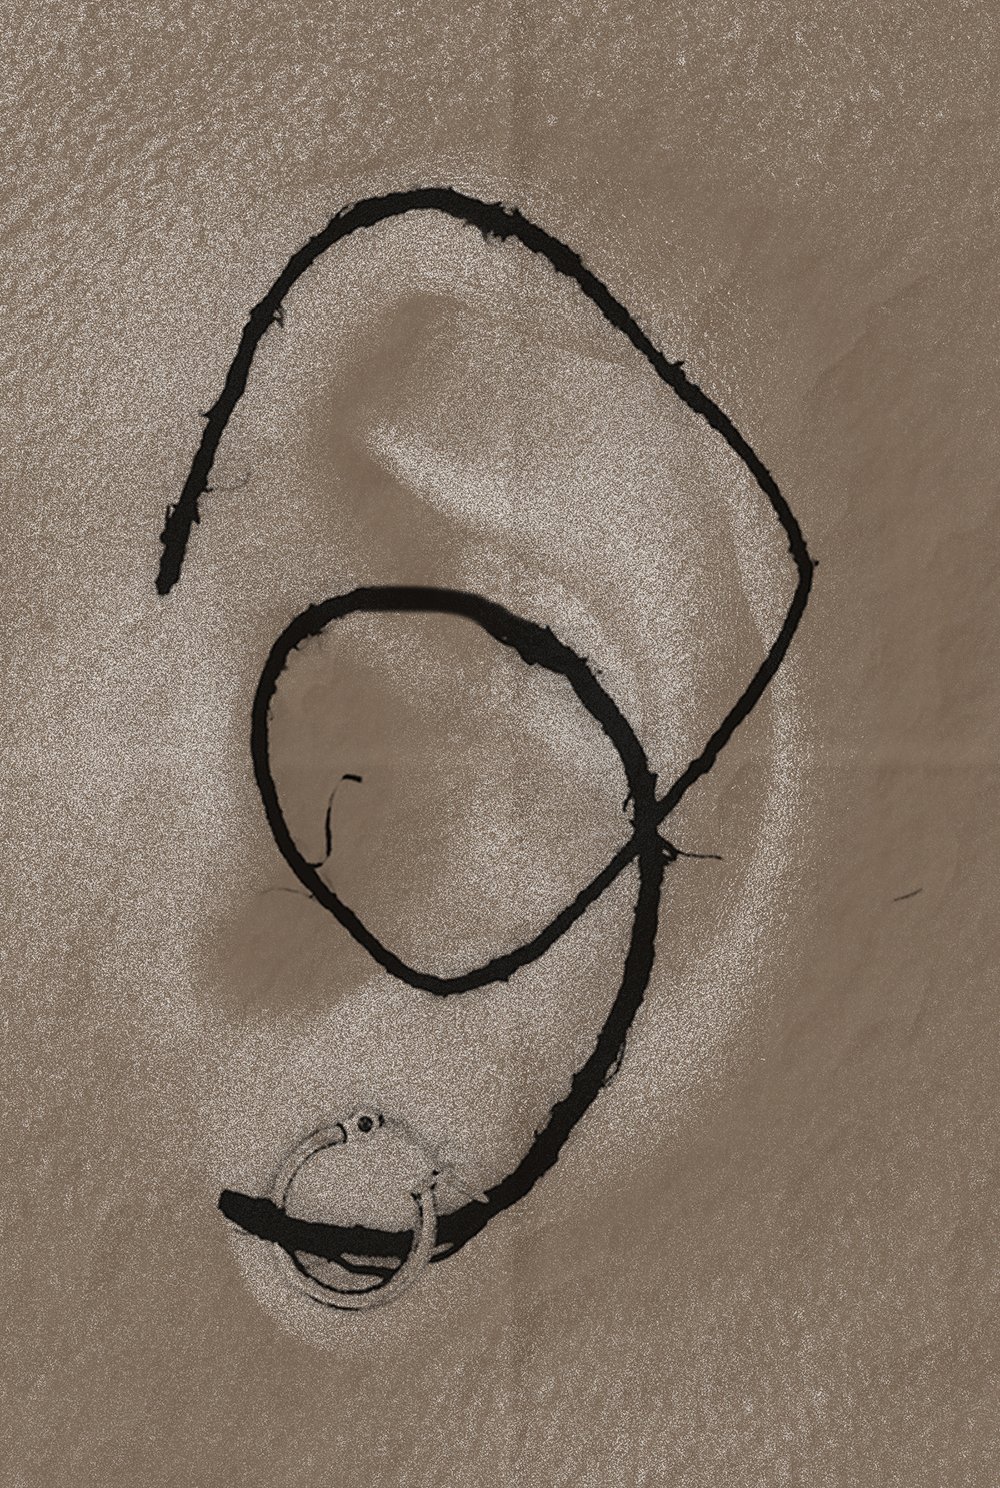 A close up of an ear printed in subdued sepia tone. A ring piercing is on the ear lobe and a thick black line is drawn along the helix, circles around the canal and passes through the ring. Two fold marks create a cross-shape.